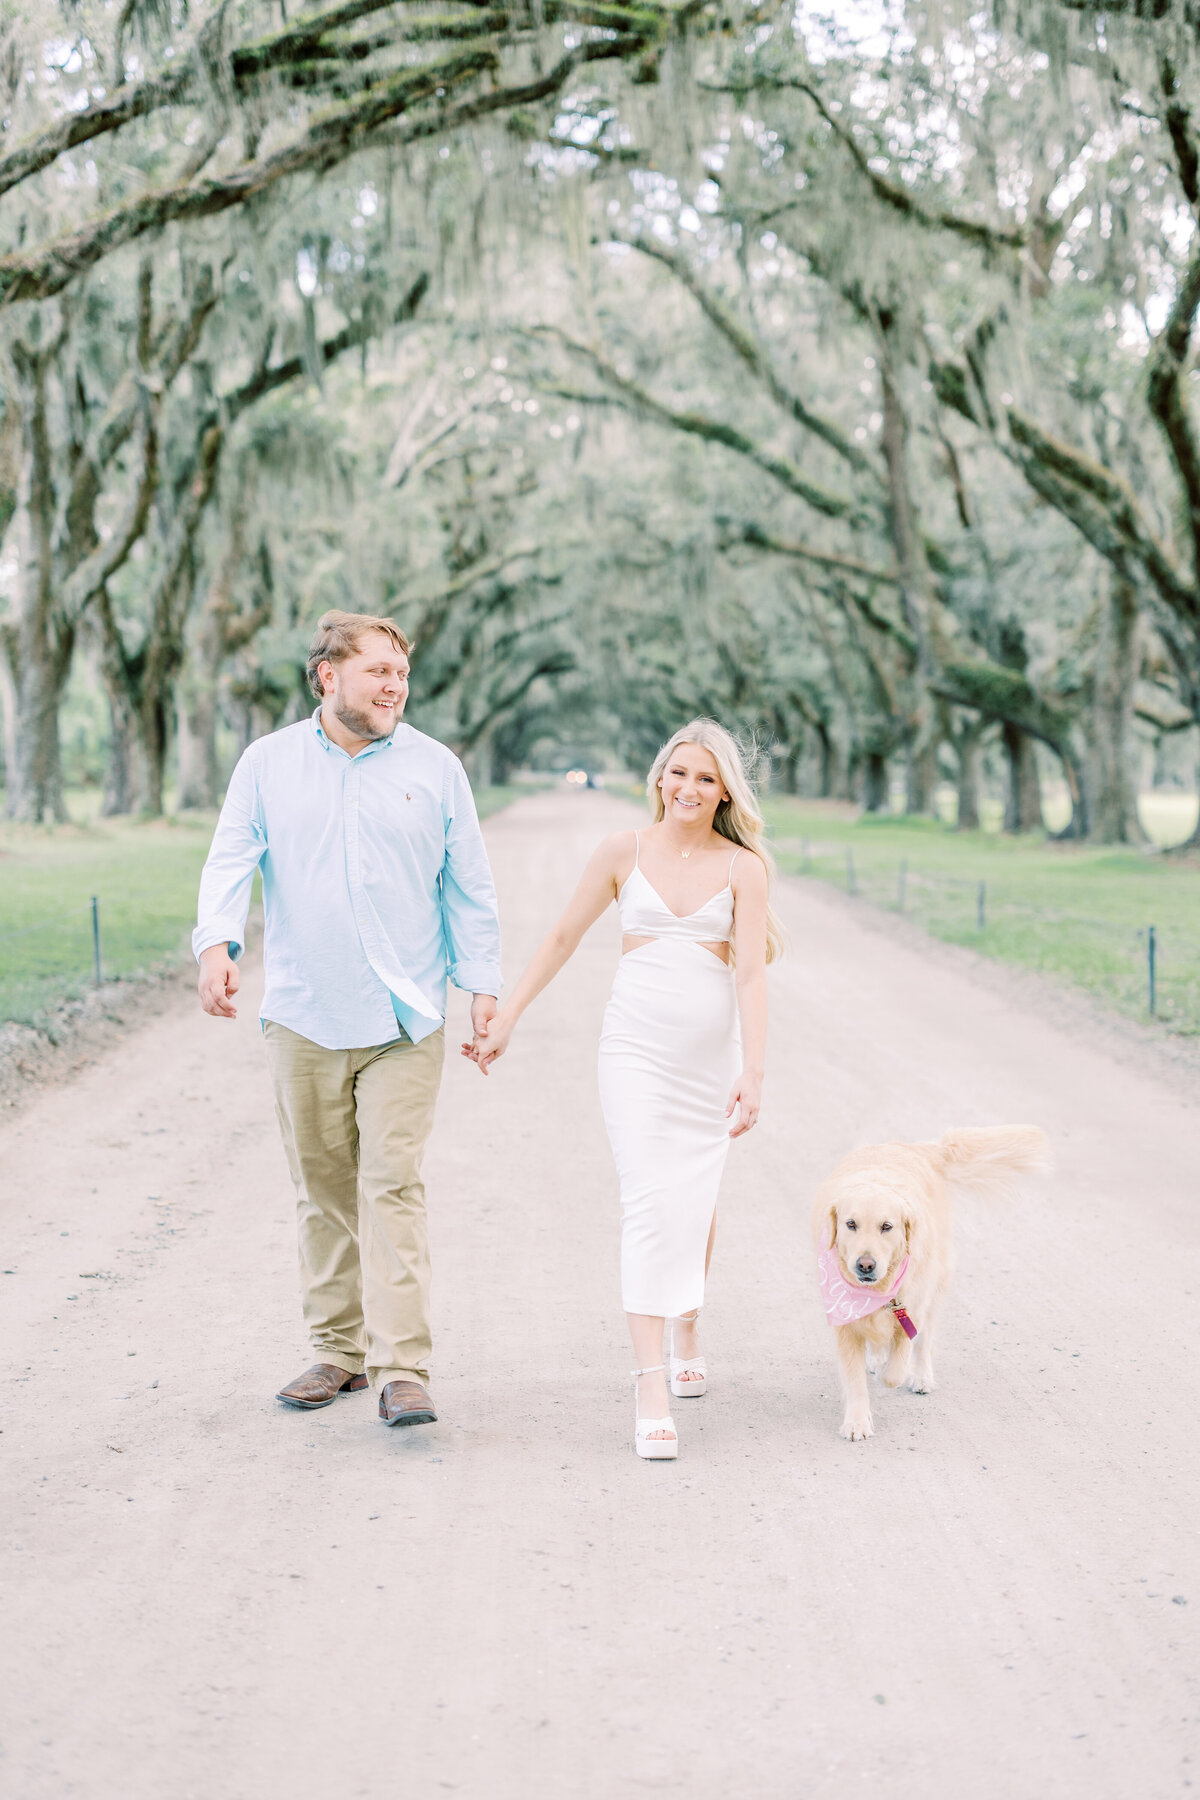 engaged couple with their dog in a tree-lined street